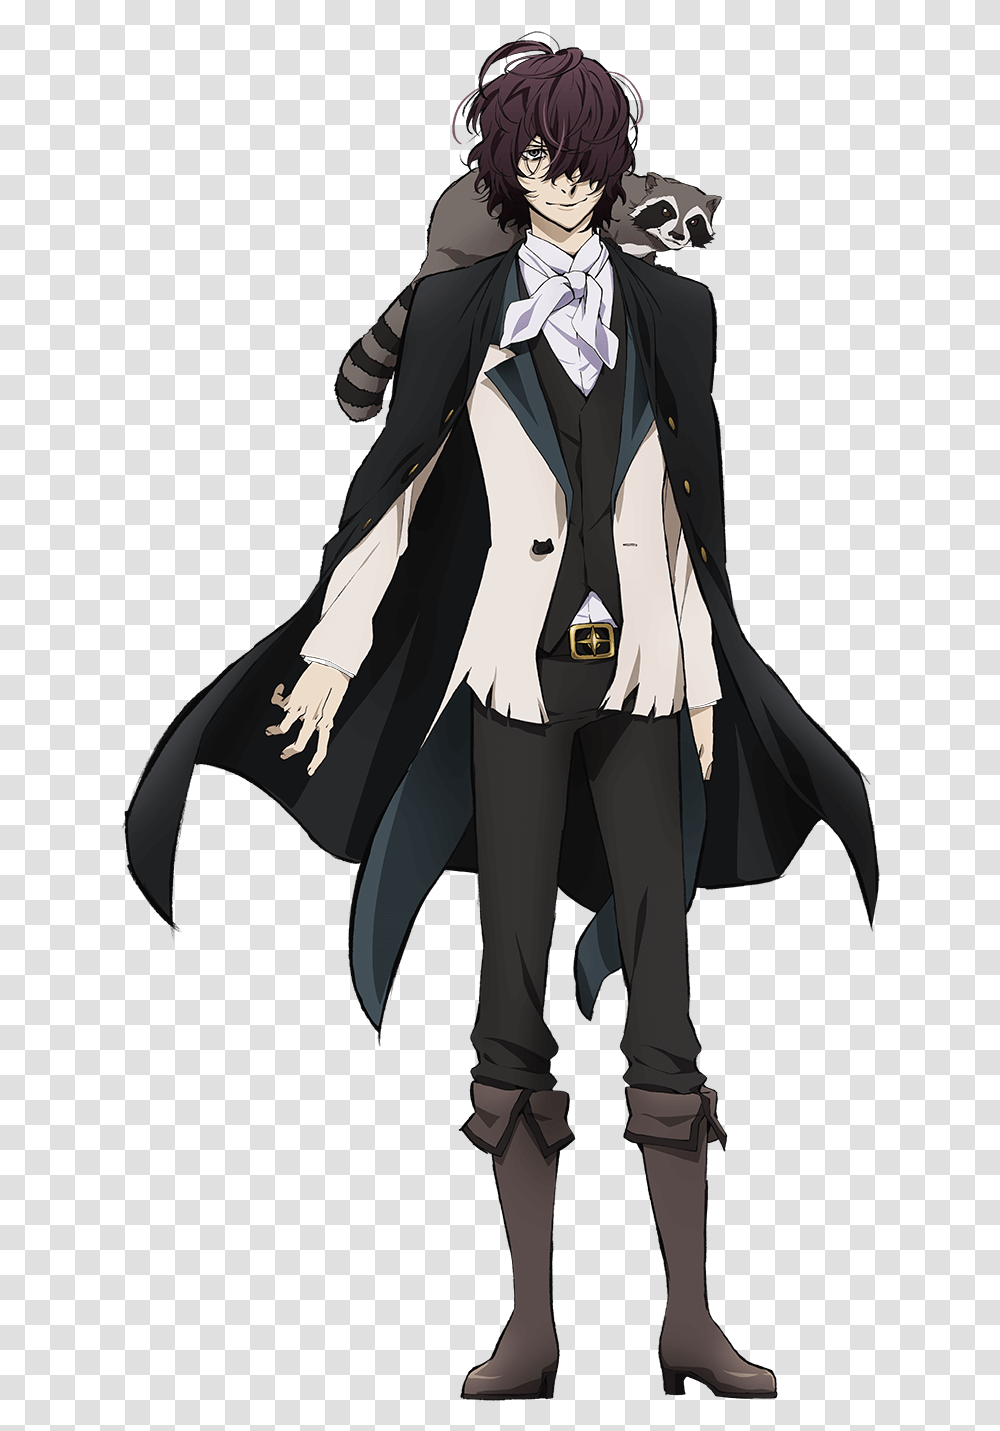 Bungo Stray Dogs Wiki Edgar Allan Poe Bungou Stray Dogs, Person, Coat, Overcoat Transparent Png